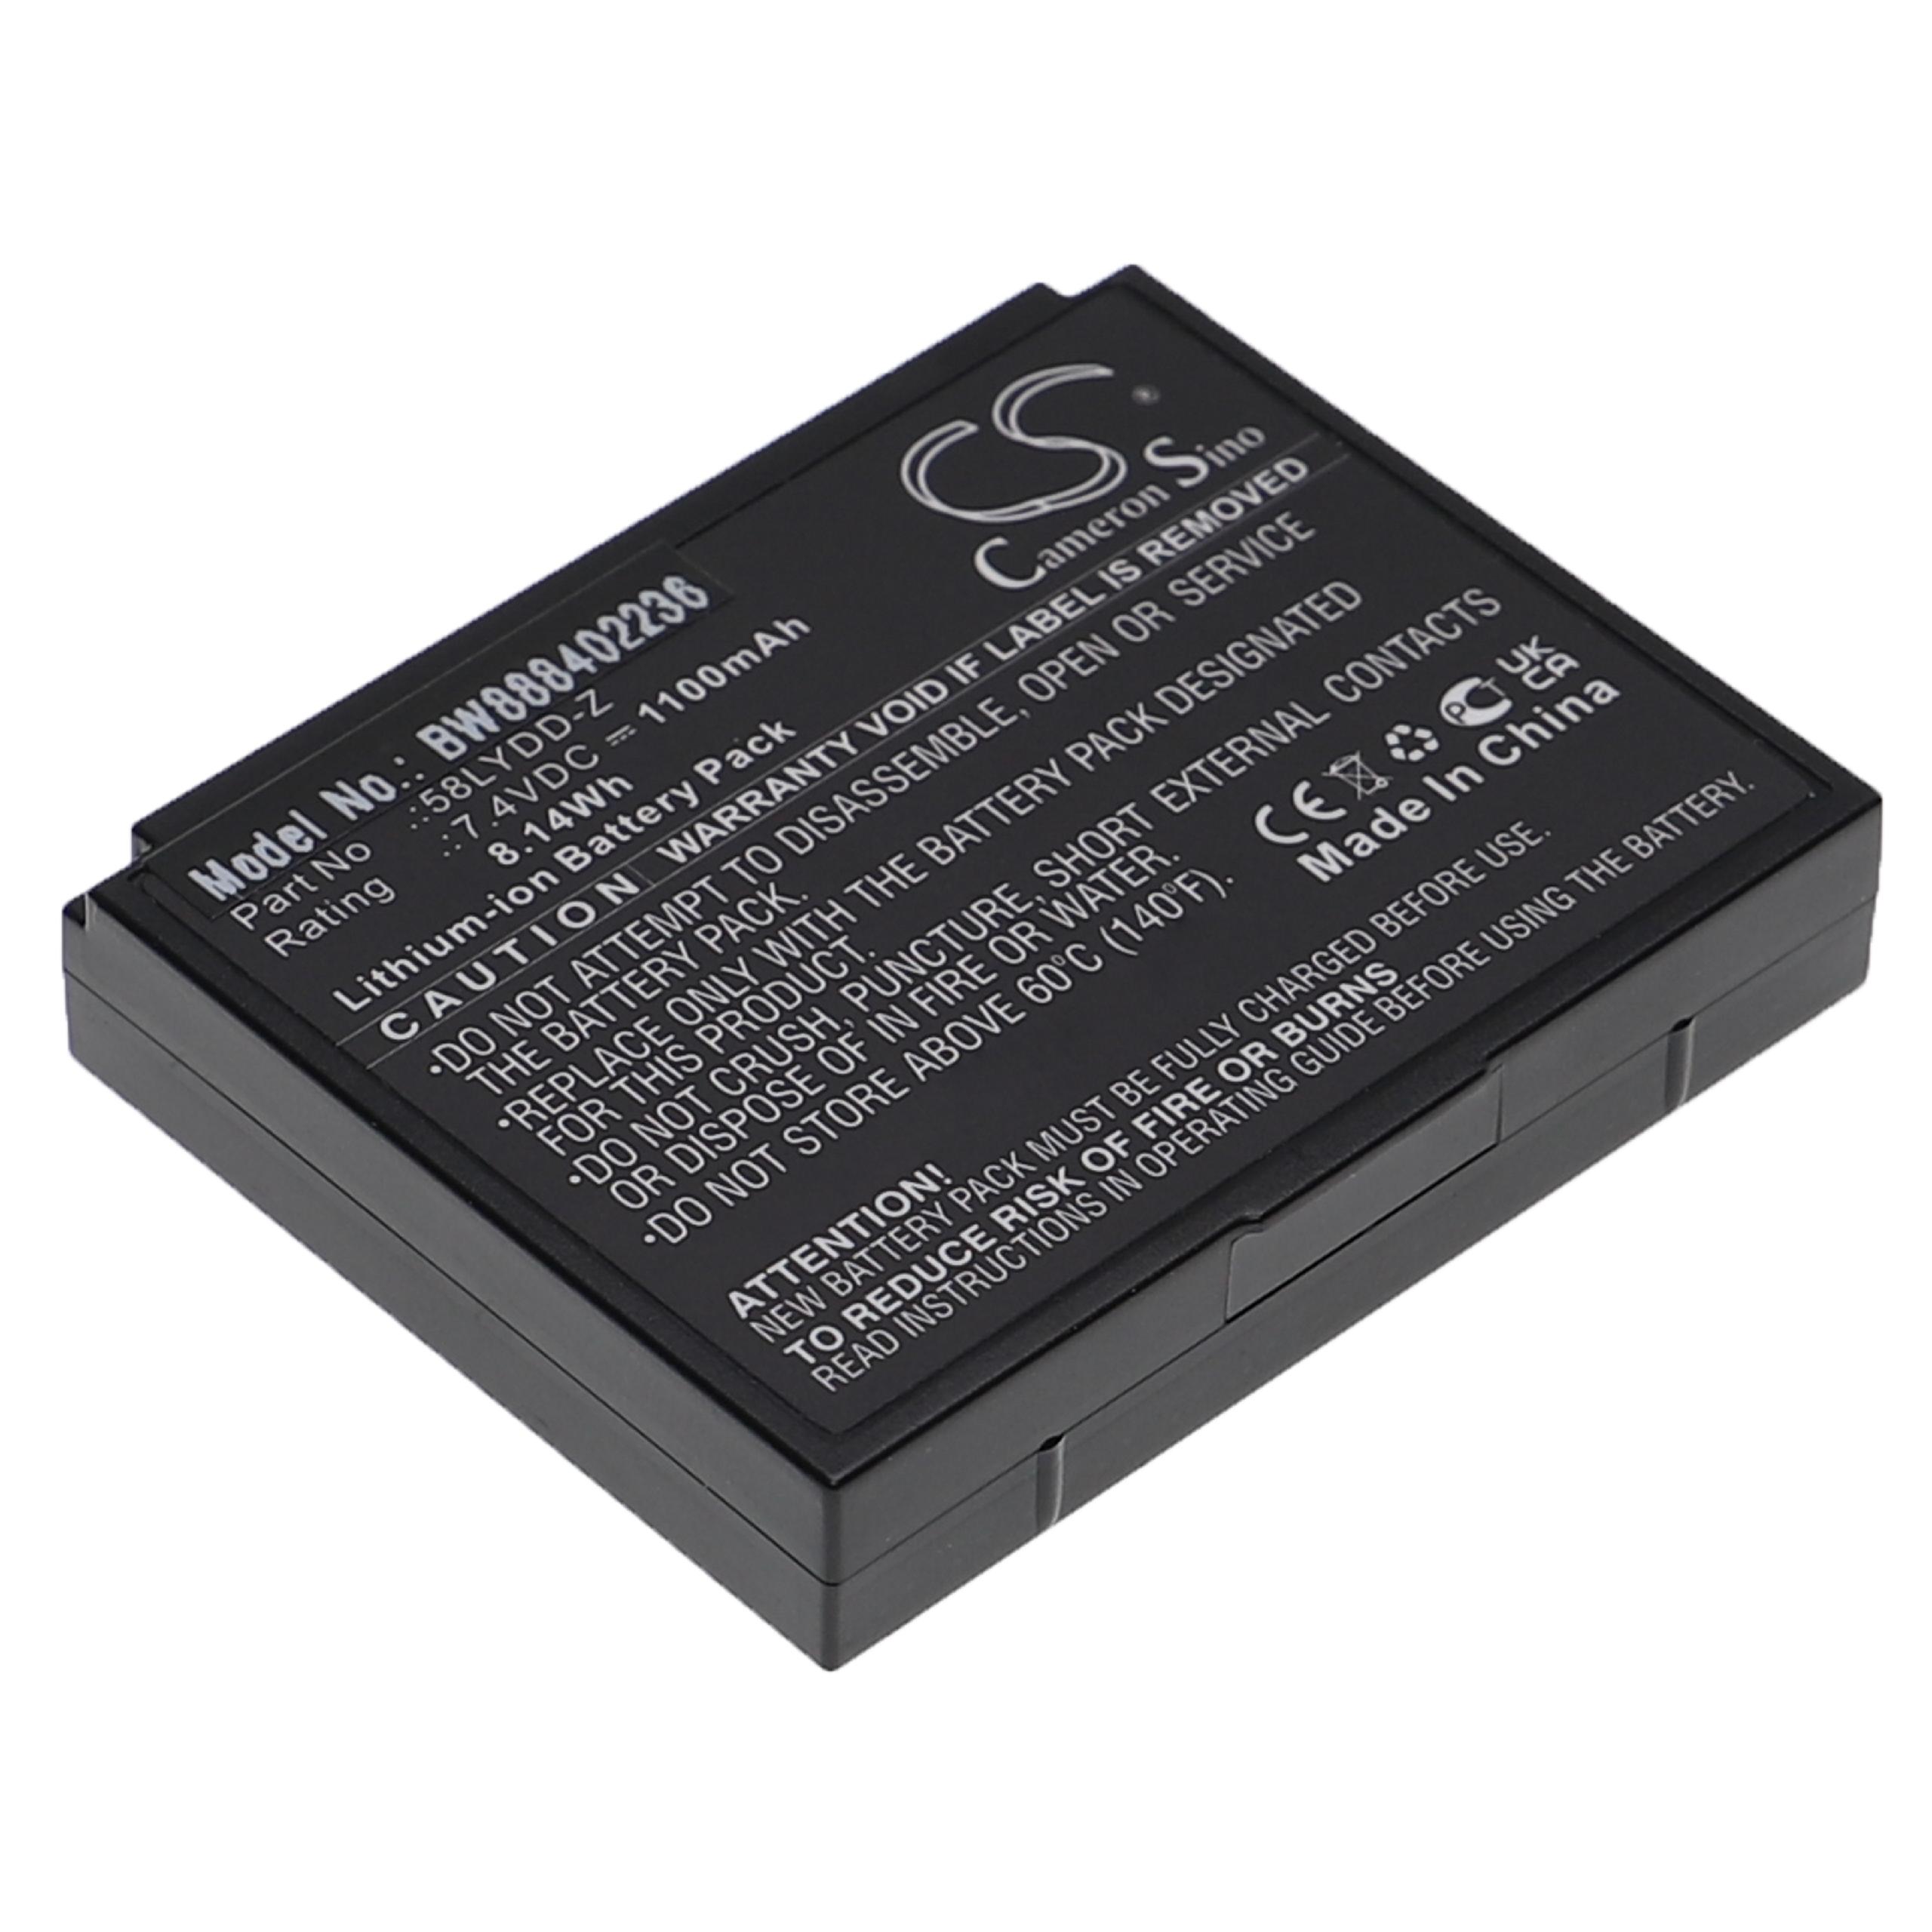 Printer Battery Replacement for Zjiang 58LYDD-Z - 1100mAh 7.4V Li-Ion